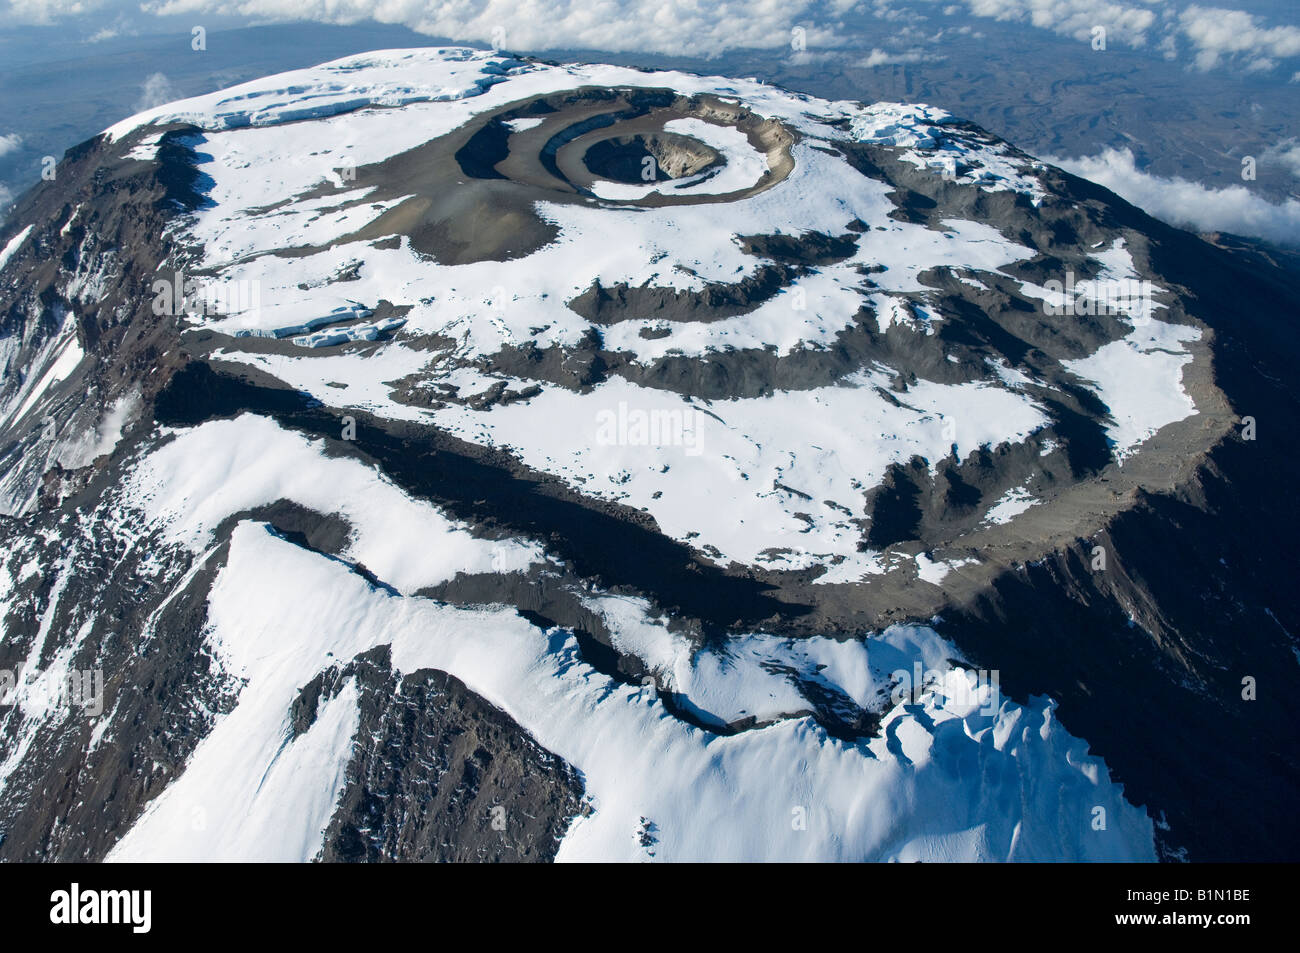 Aerial view of Kilimanjaro 19335 ft. (5895 m) Crater floor with Ash cone and pit, Southern Ice field (foreground), Tanzania Stock Photo